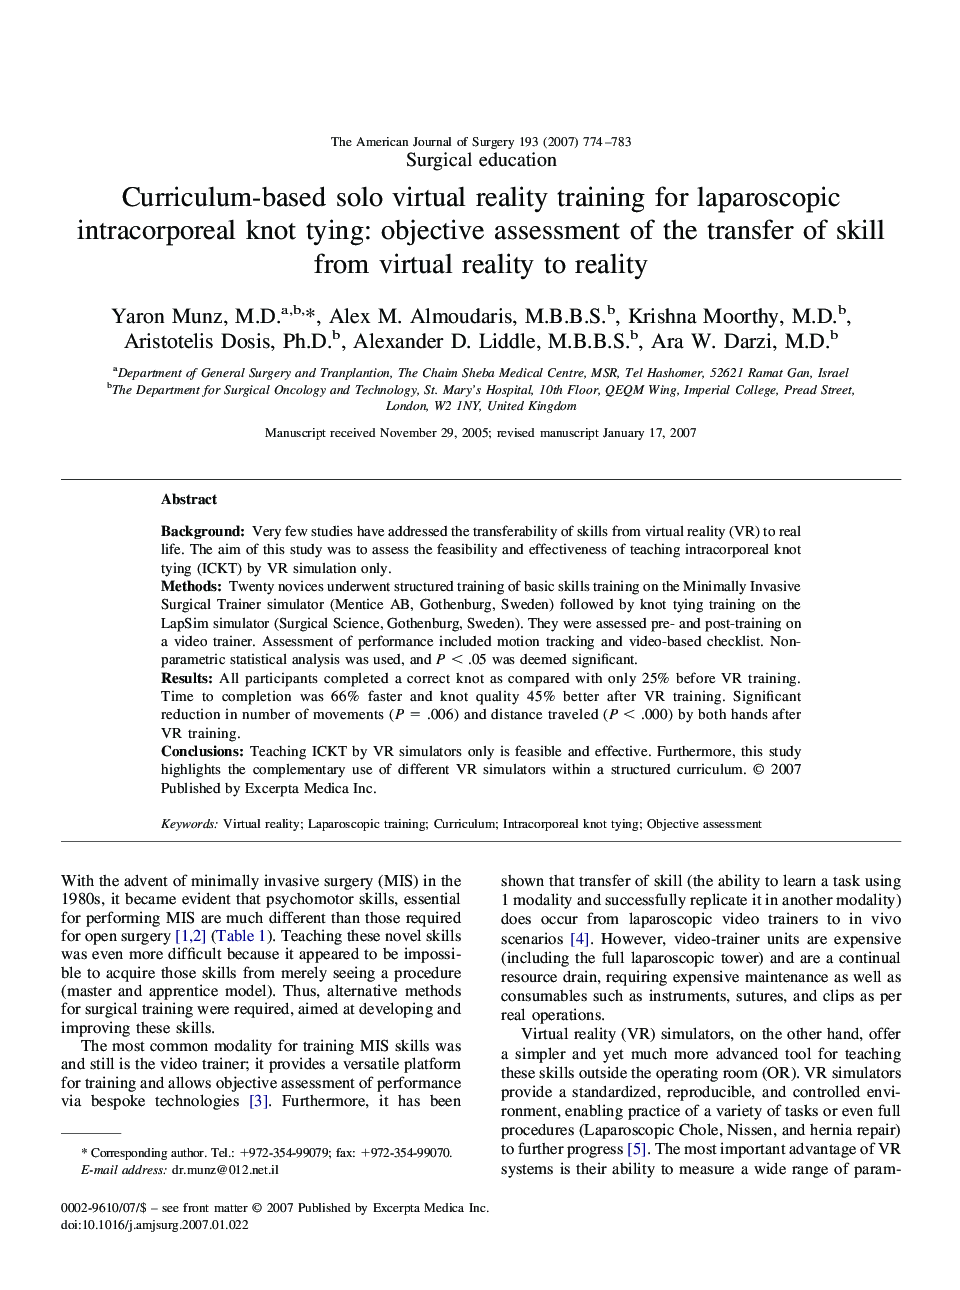 Curriculum-based solo virtual reality training for laparoscopic intracorporeal knot tying: objective assessment of the transfer of skill from virtual reality to reality